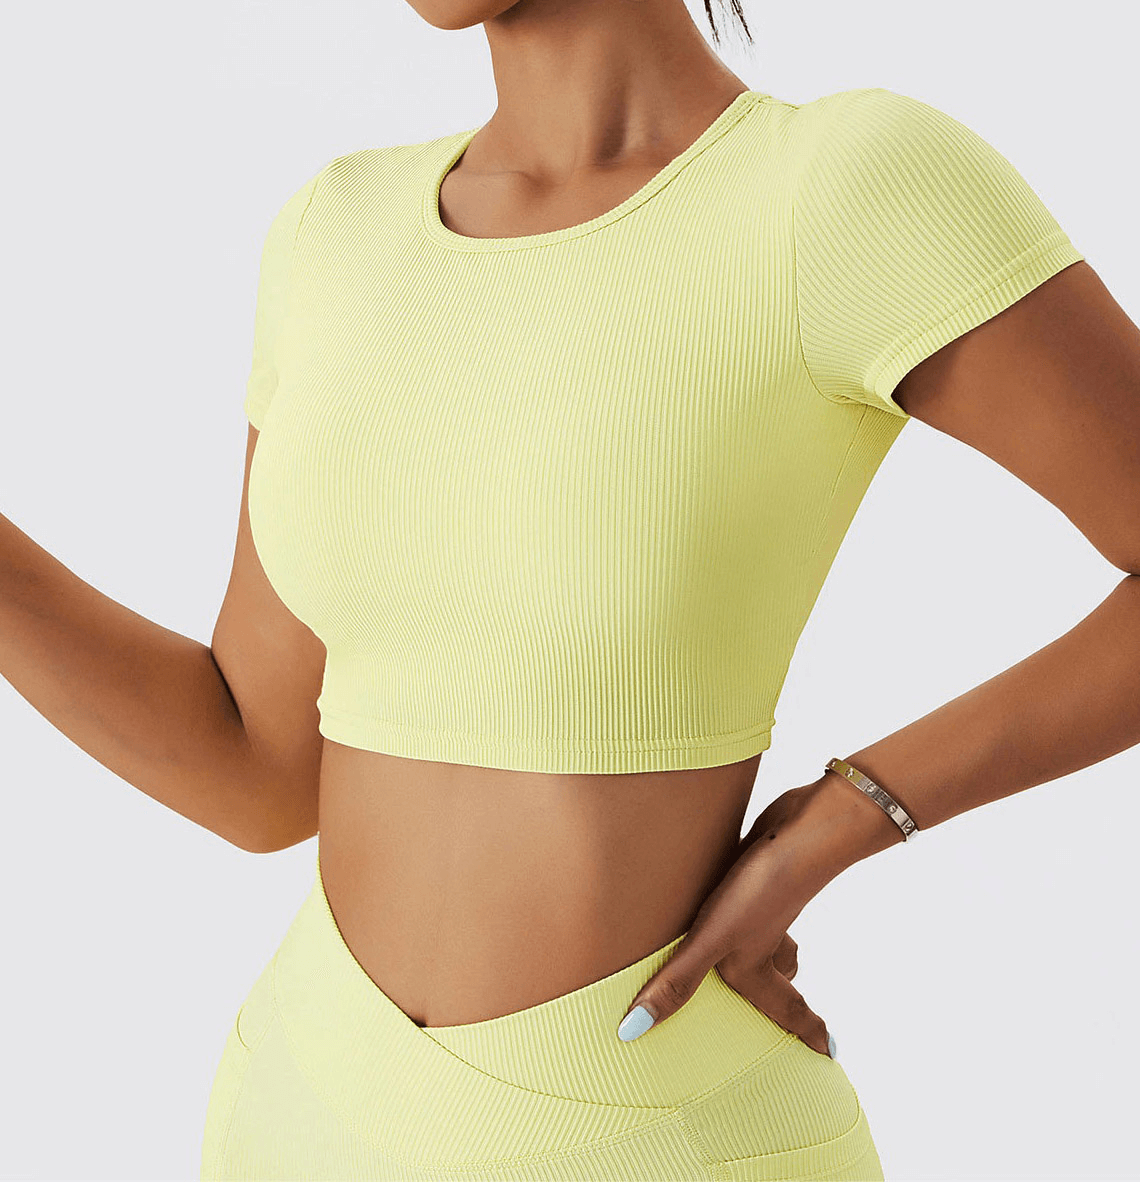 Running Sexy Sports T-Shirt with Open Back / Women's Fitness Crop Top - SF0010